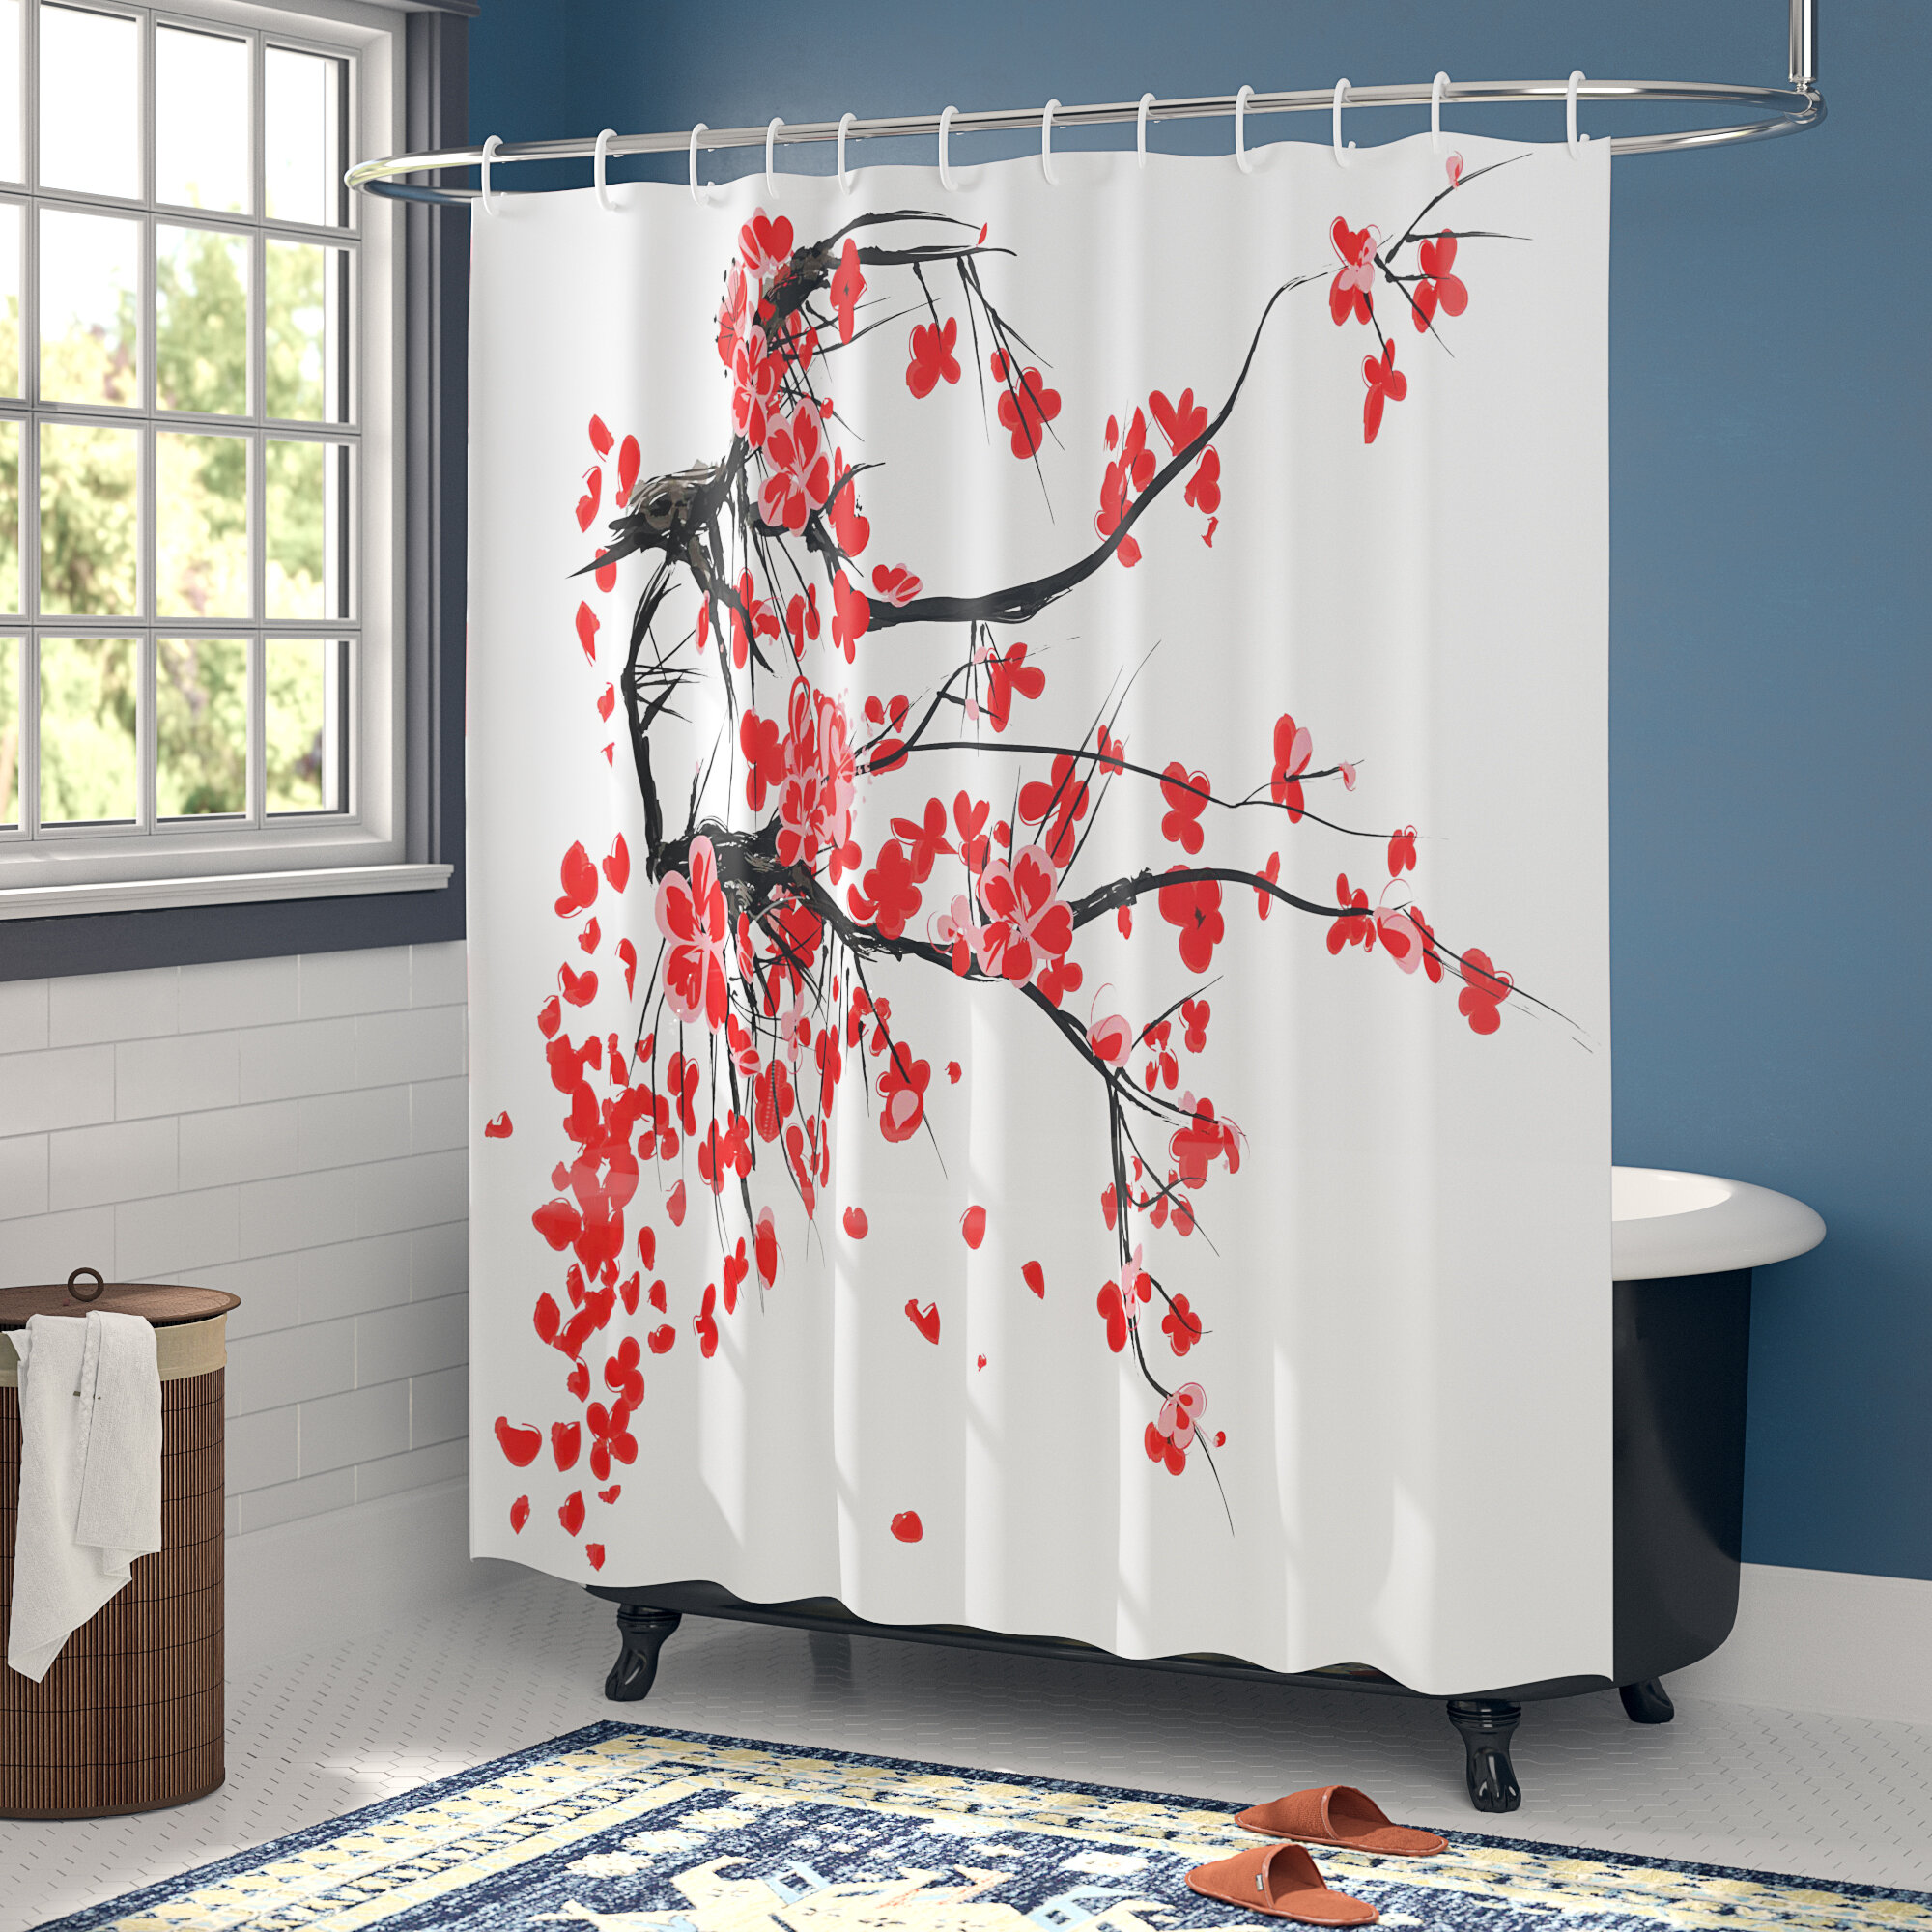 MitoVilla Japanese Cherry Blossom Shower Curtain For Women And Baby Girls Gifts, 